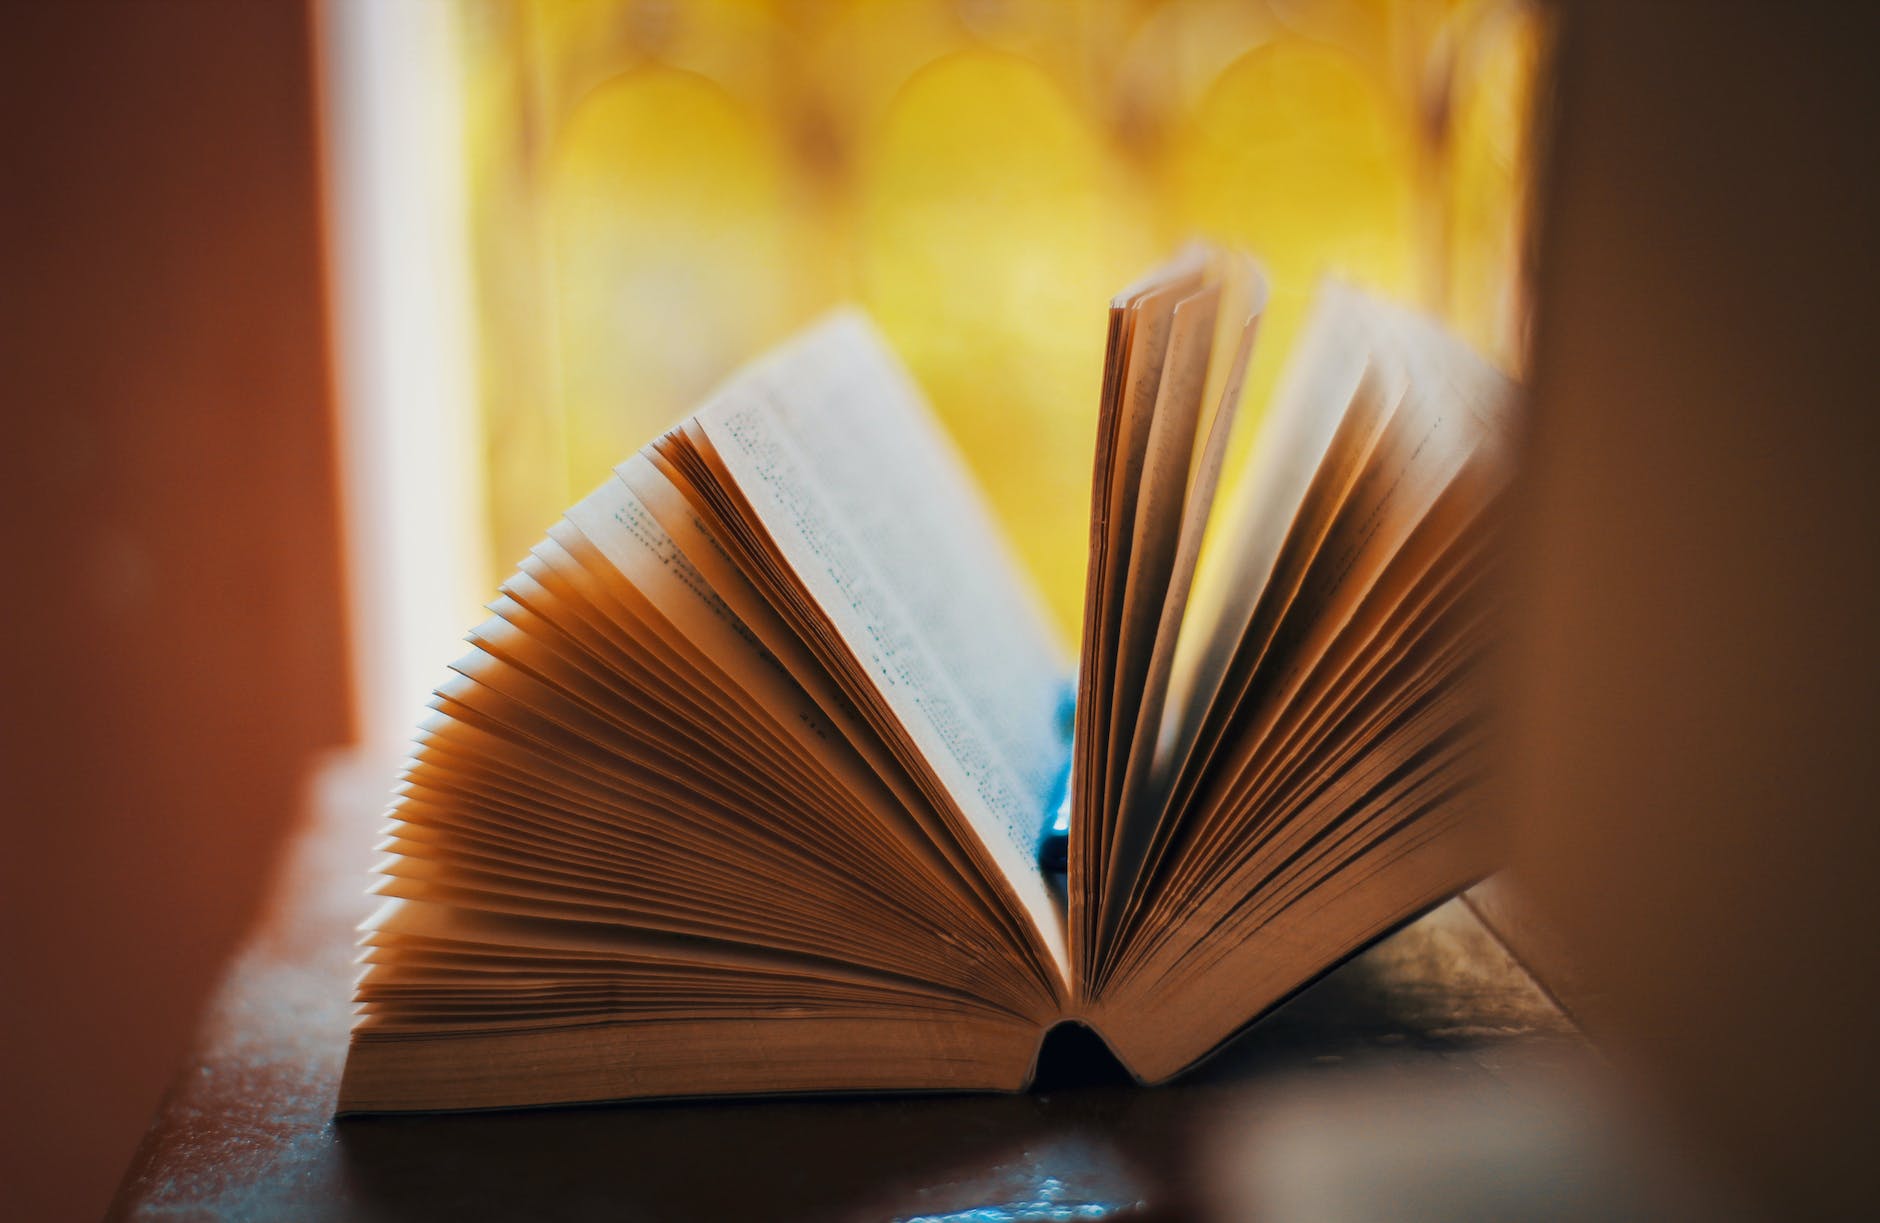 Book fanned open in front of a window with golden light coming in from outside. Photo by Sumit Mathur on Pexels.com.